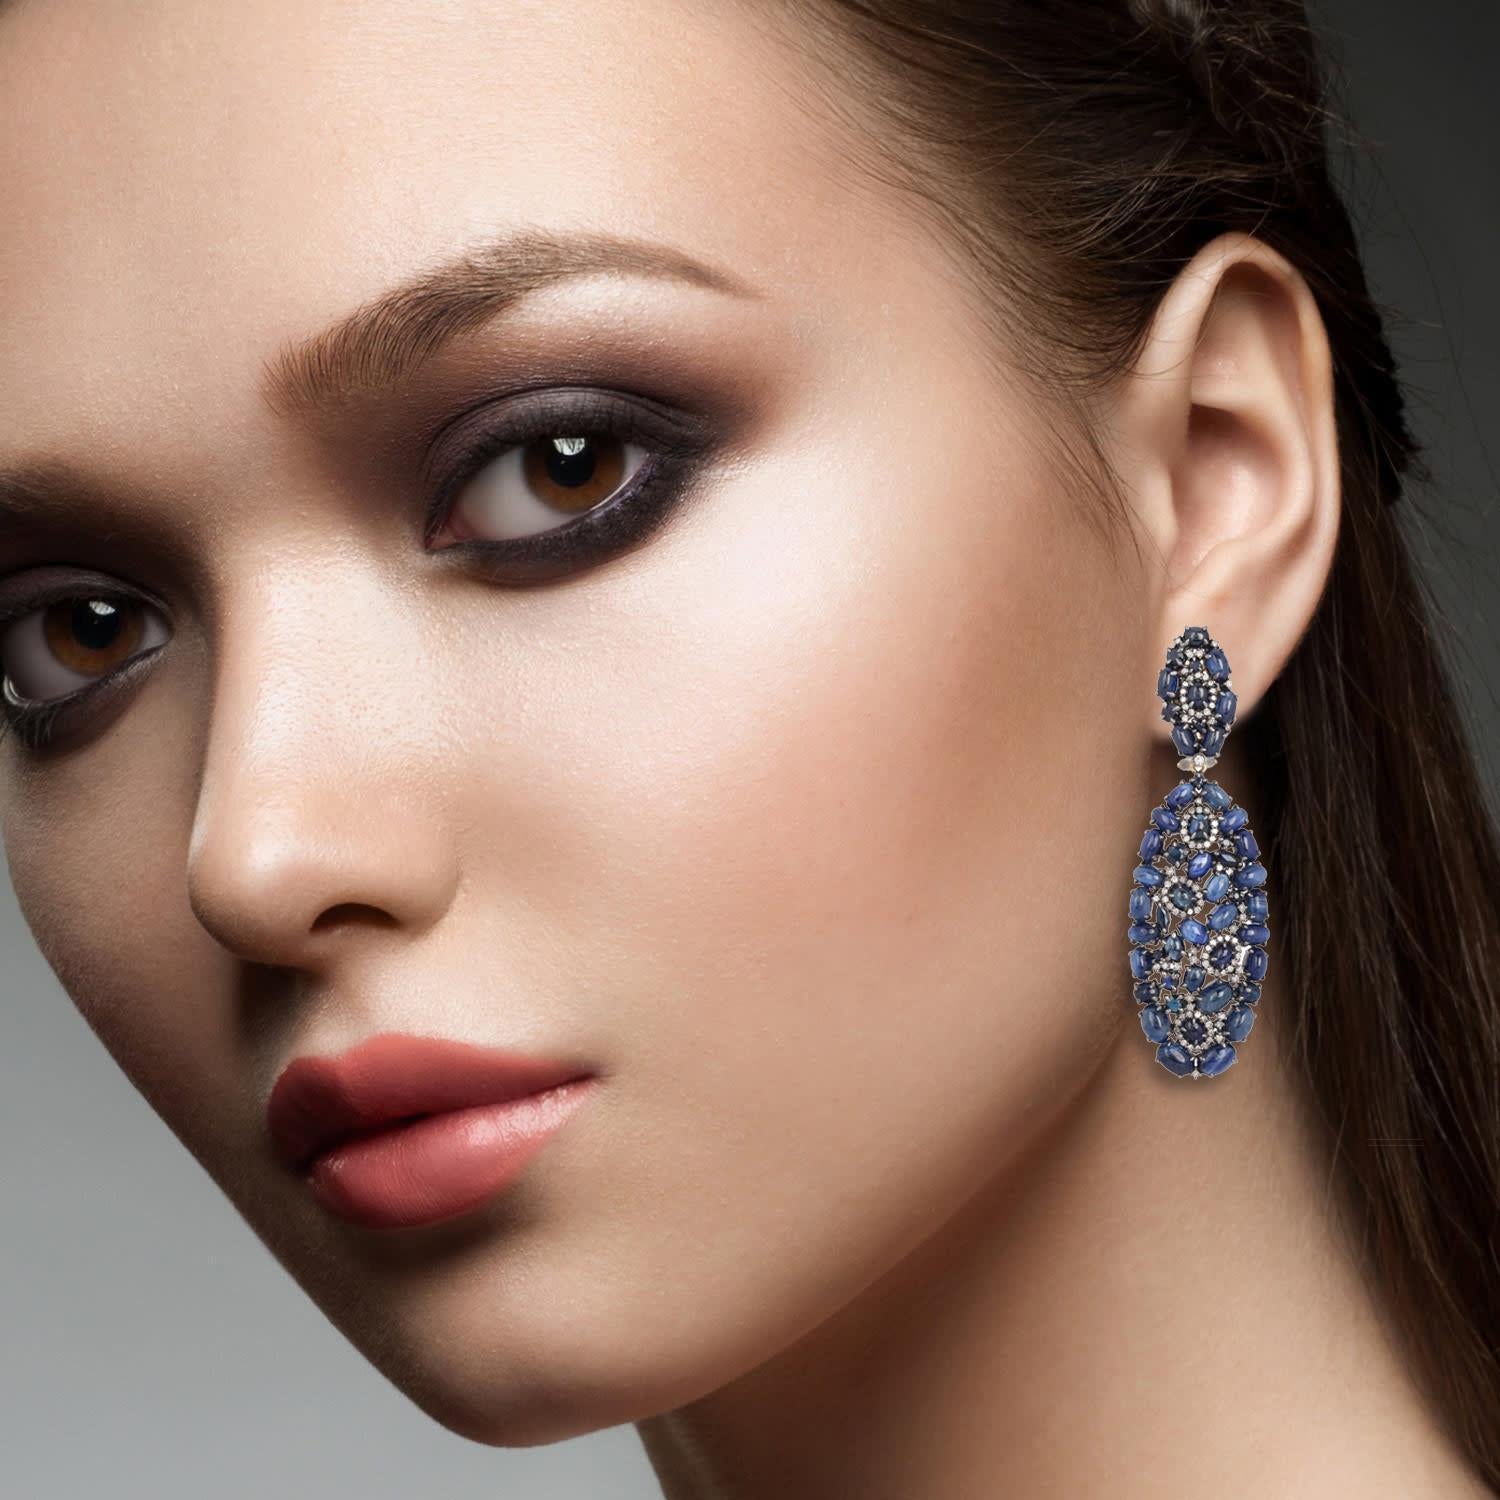 Cast from 18 karat gold & sterling silver, these beautiful earrings are hand set with 31.86 carats blue sapphire and .96 carats of shimmering diamonds.

FOLLOW  MEGHNA JEWELS storefront to view the latest collection & exclusive pieces.  Meghna